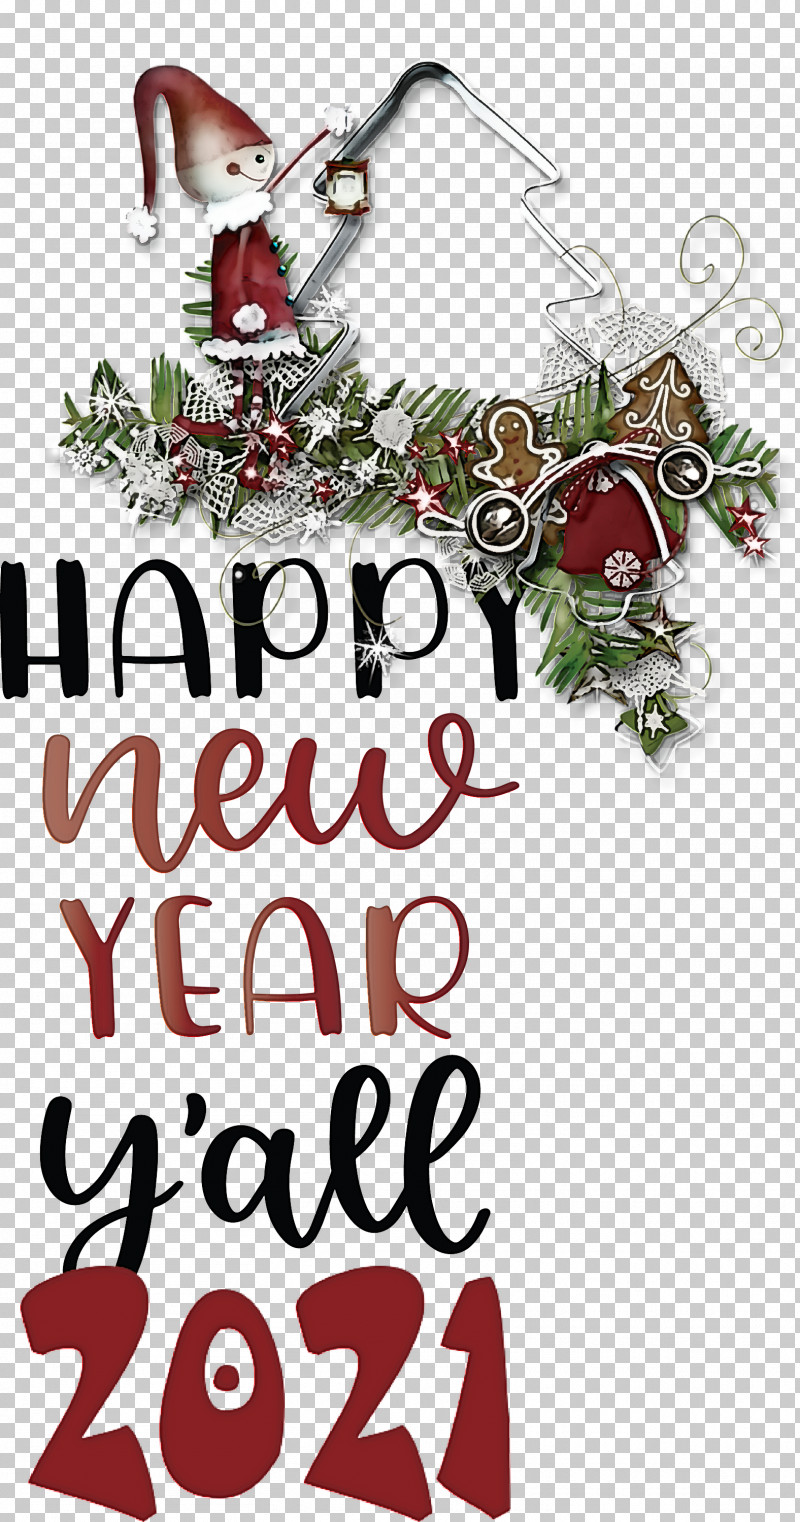 2021 Happy New Year 2021 New Year 2021 Wishes PNG, Clipart, 2021 Happy New Year, 2021 New Year, 2021 Wishes, Character, Christmas Day Free PNG Download